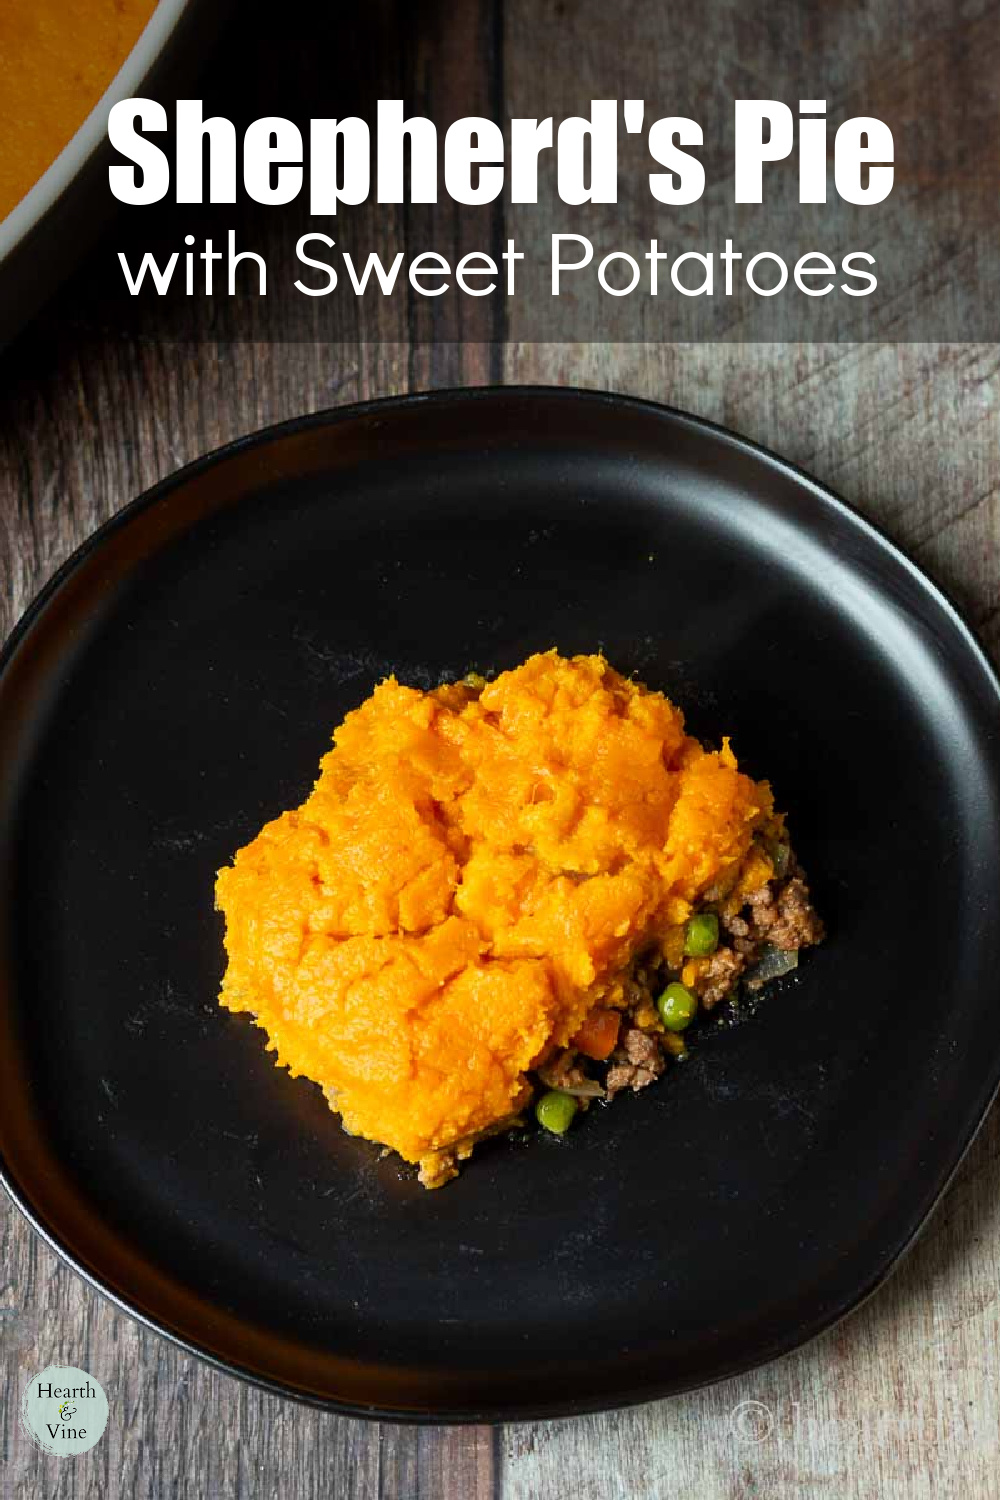 Serving of Shepherd's Pie with sweet potatoes and beef.